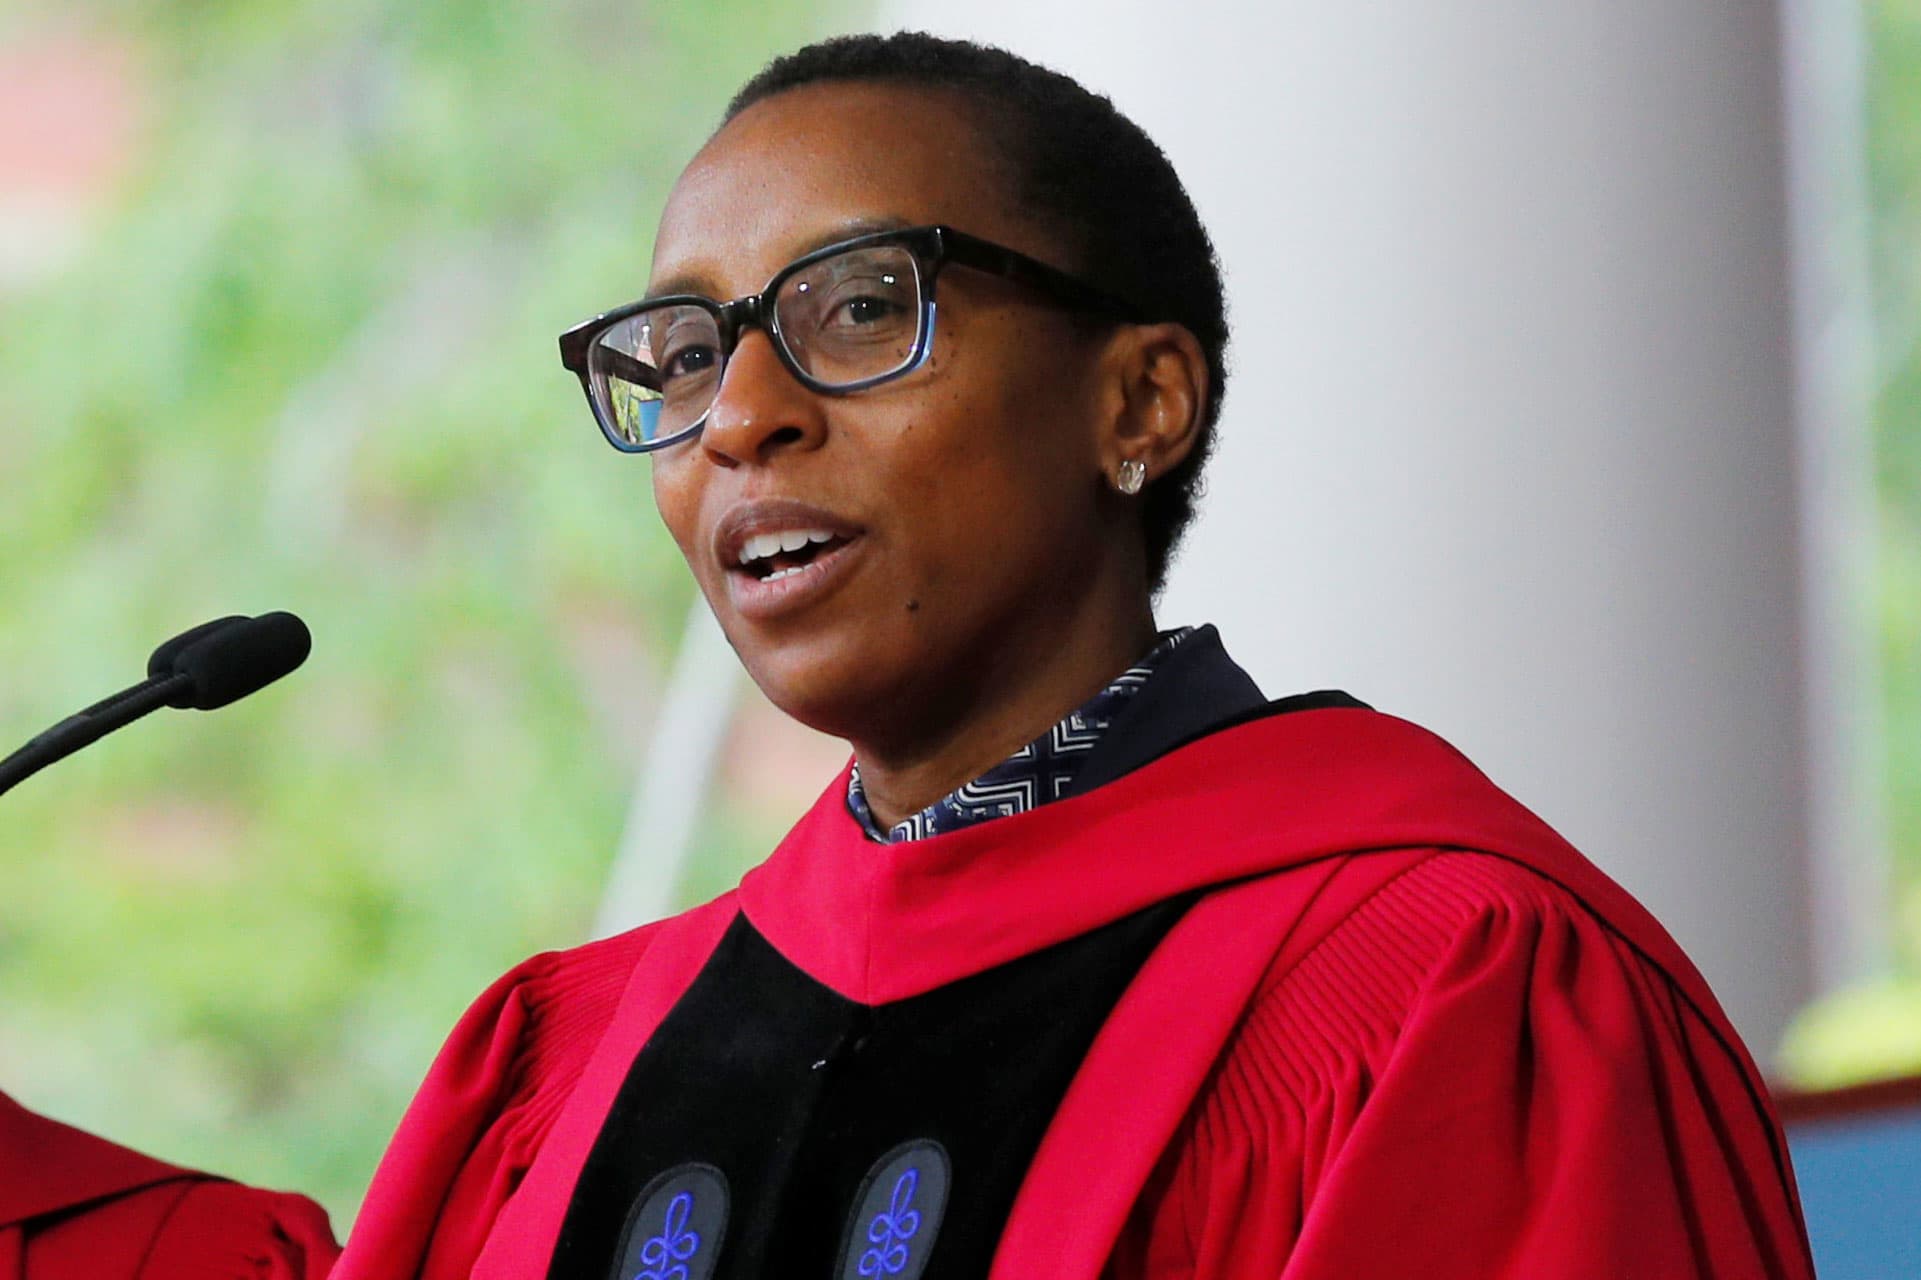 Harvard University names Claudine Gay as first person of color president